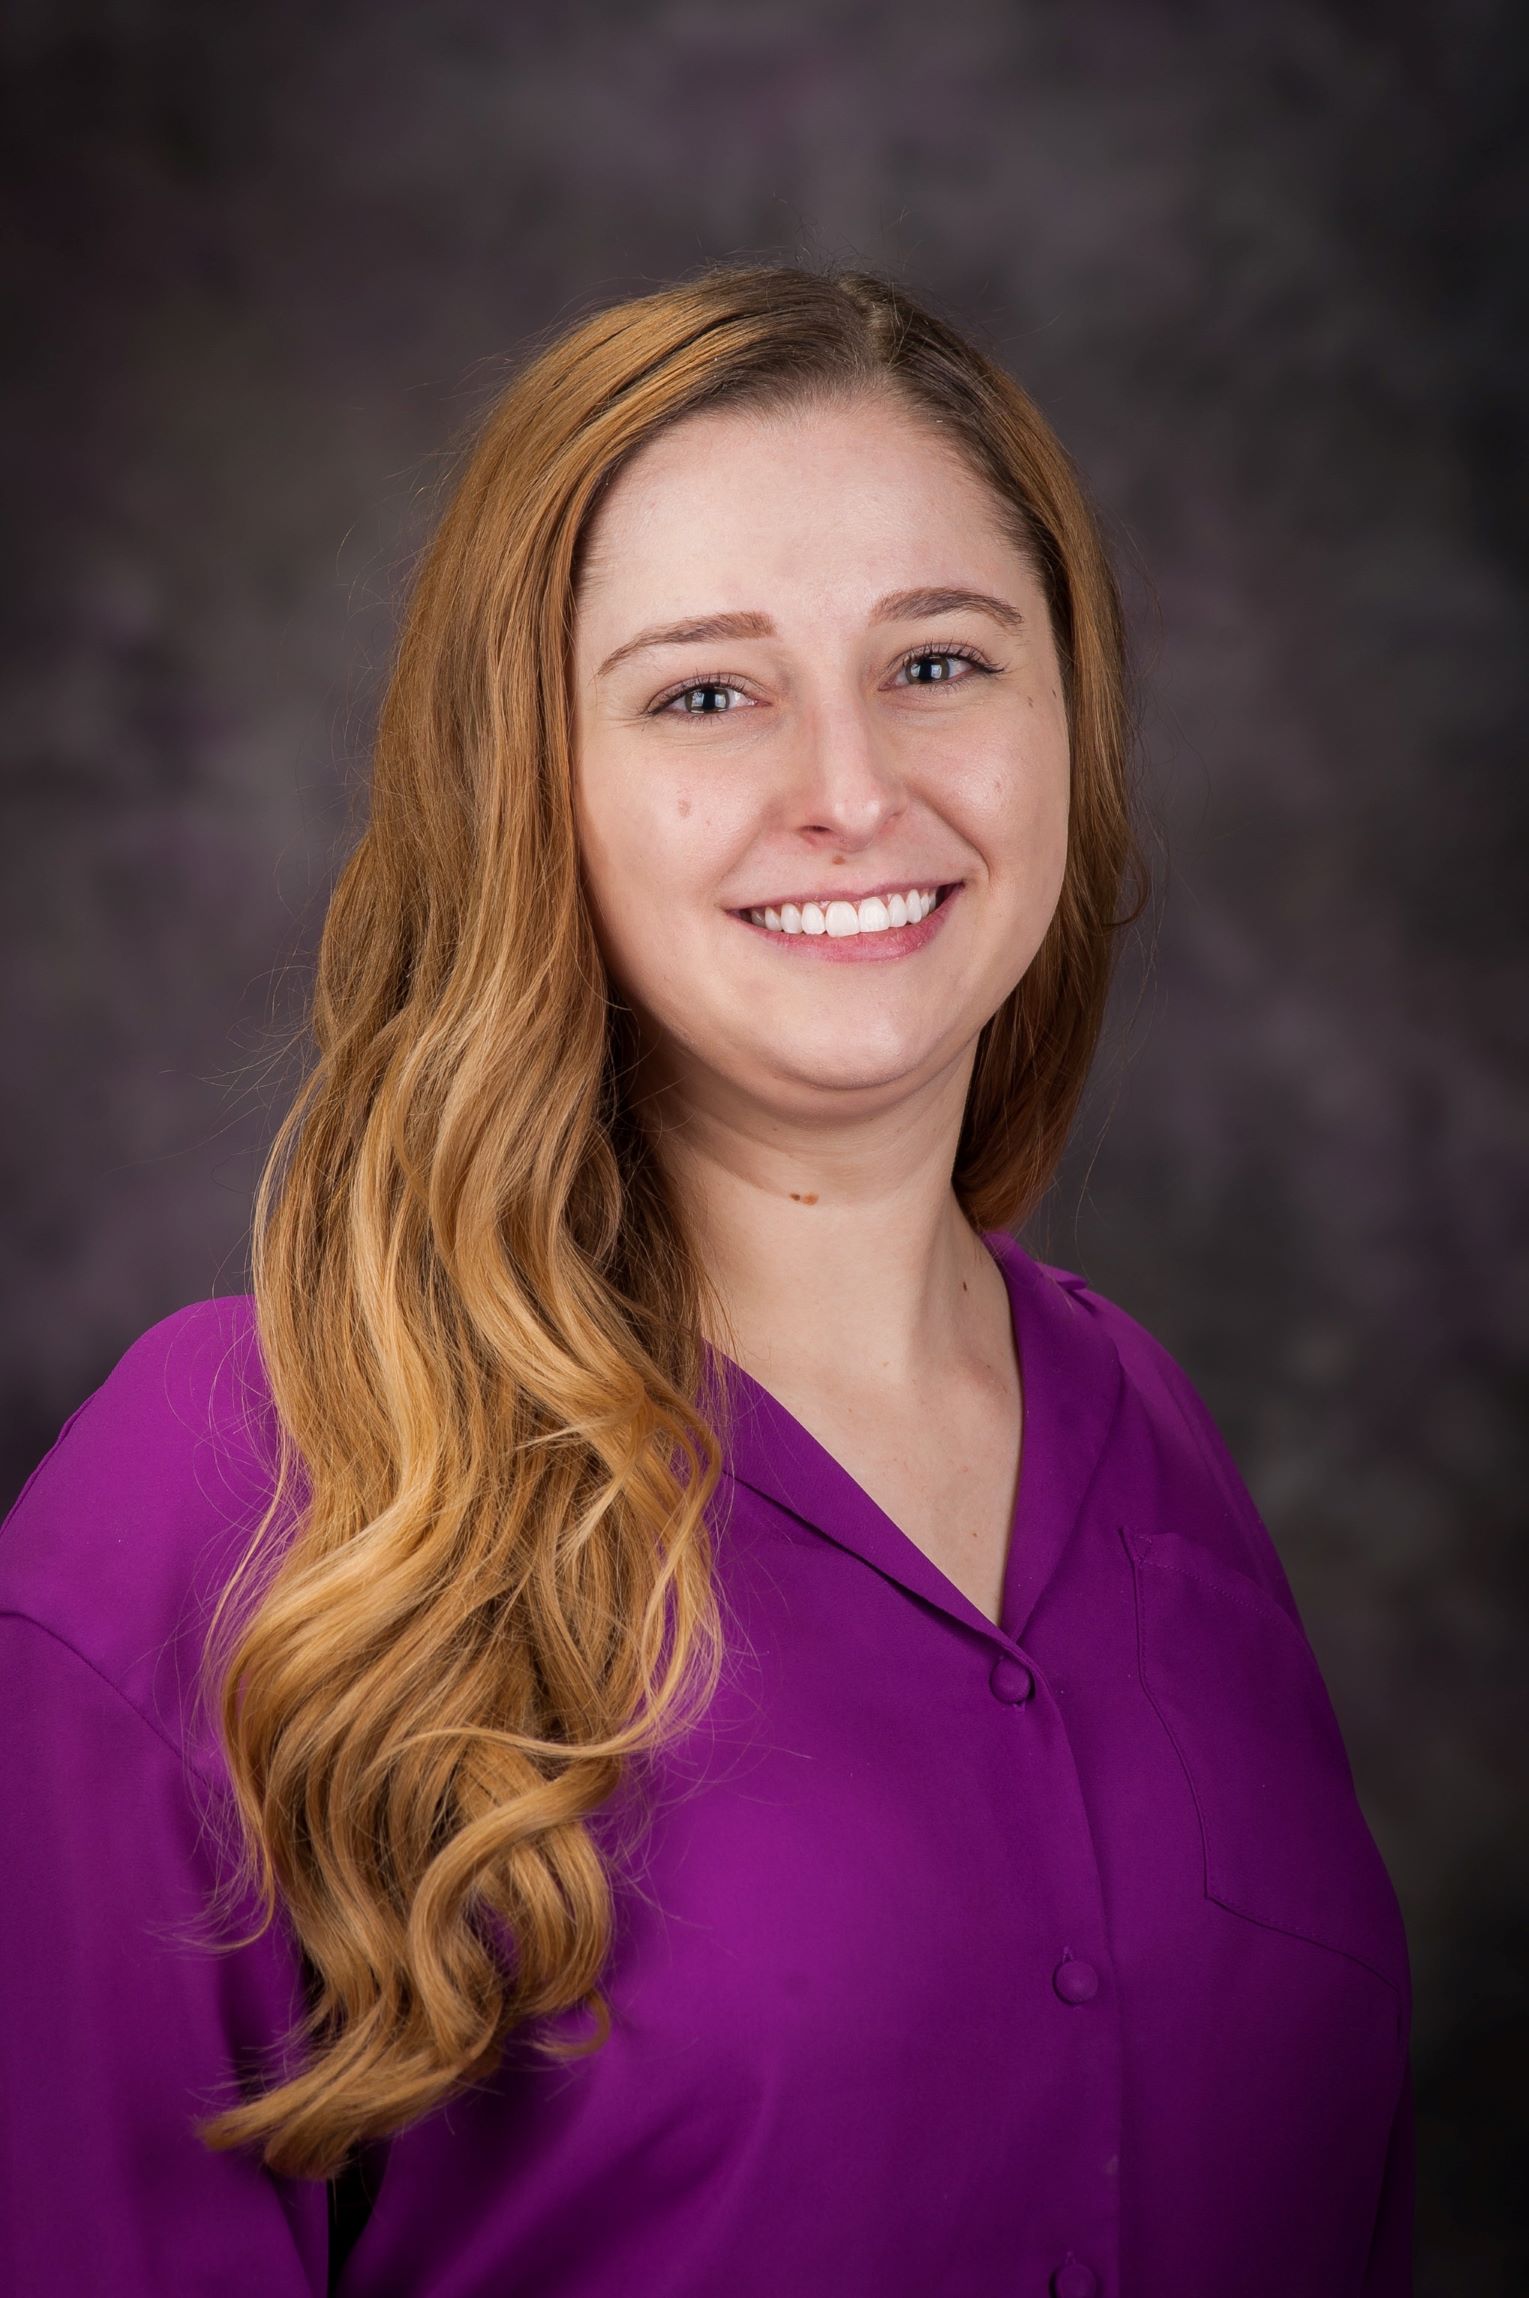 Amanda Reichenberger's headshot. She has long, caramel colored hair and is wearing a purple blouse.